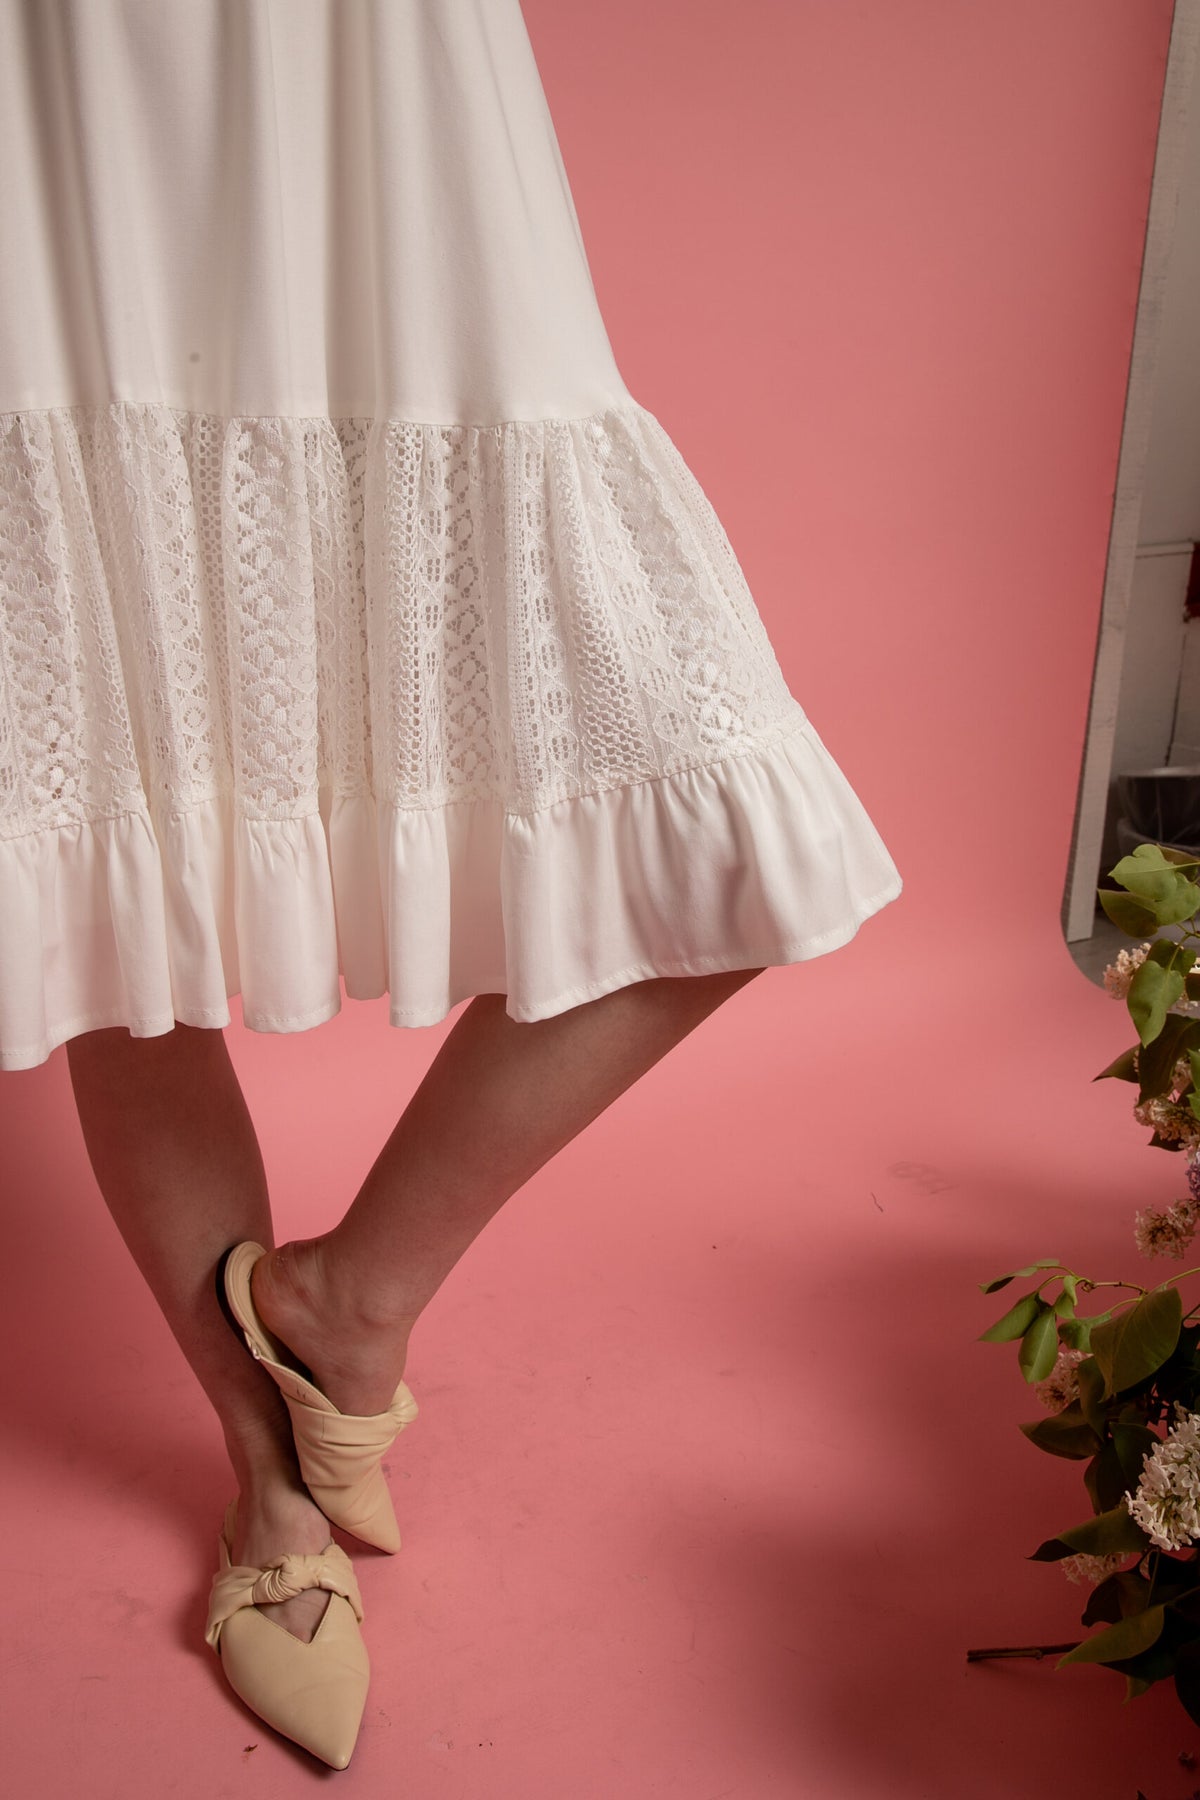 White short cotton dress with lace